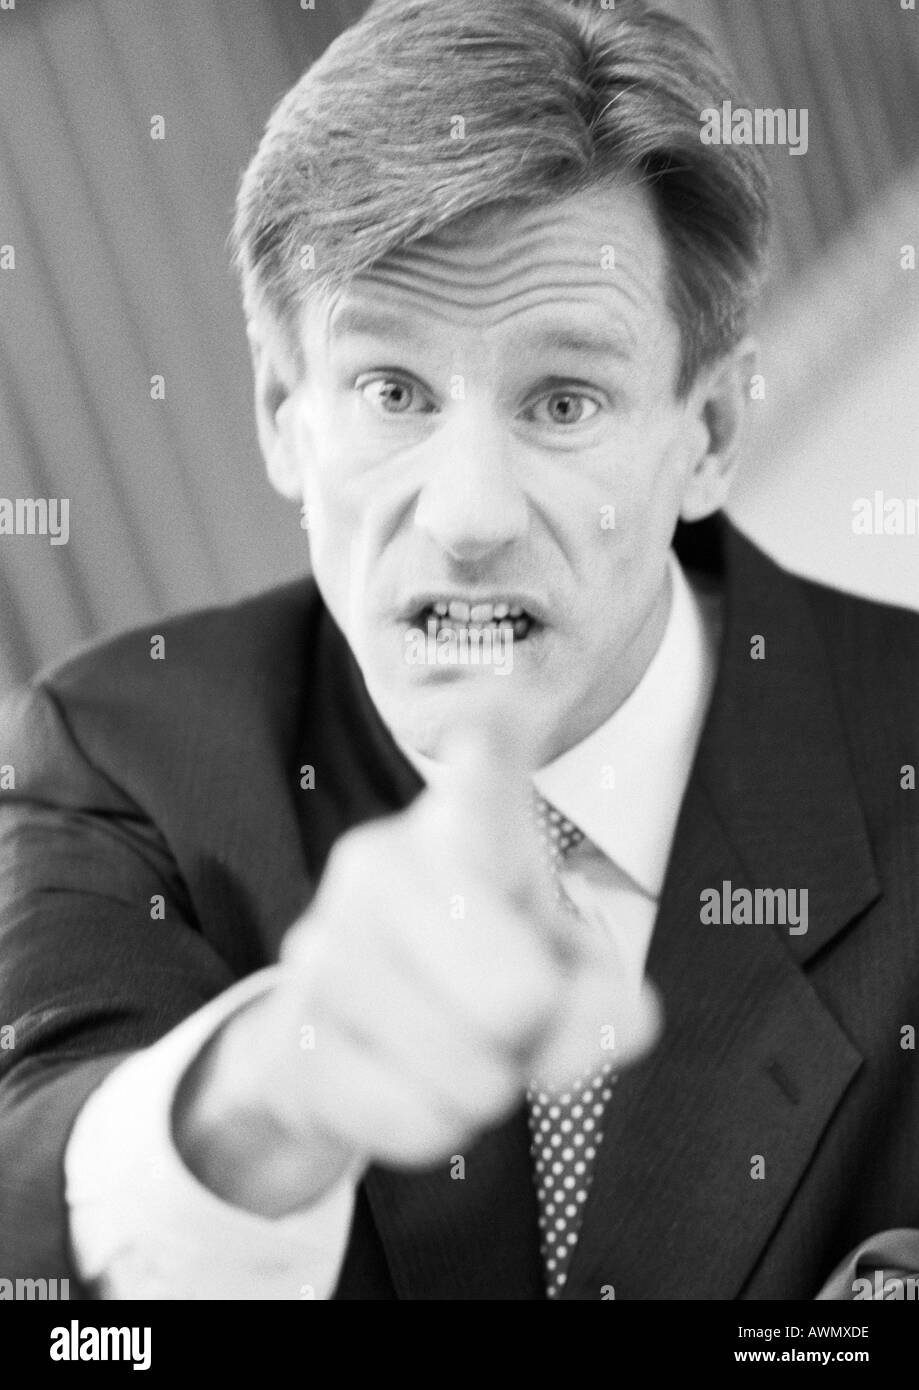 Businessman pointing at camera, hand blurred in foreground, black and white, portrait. Stock Photo